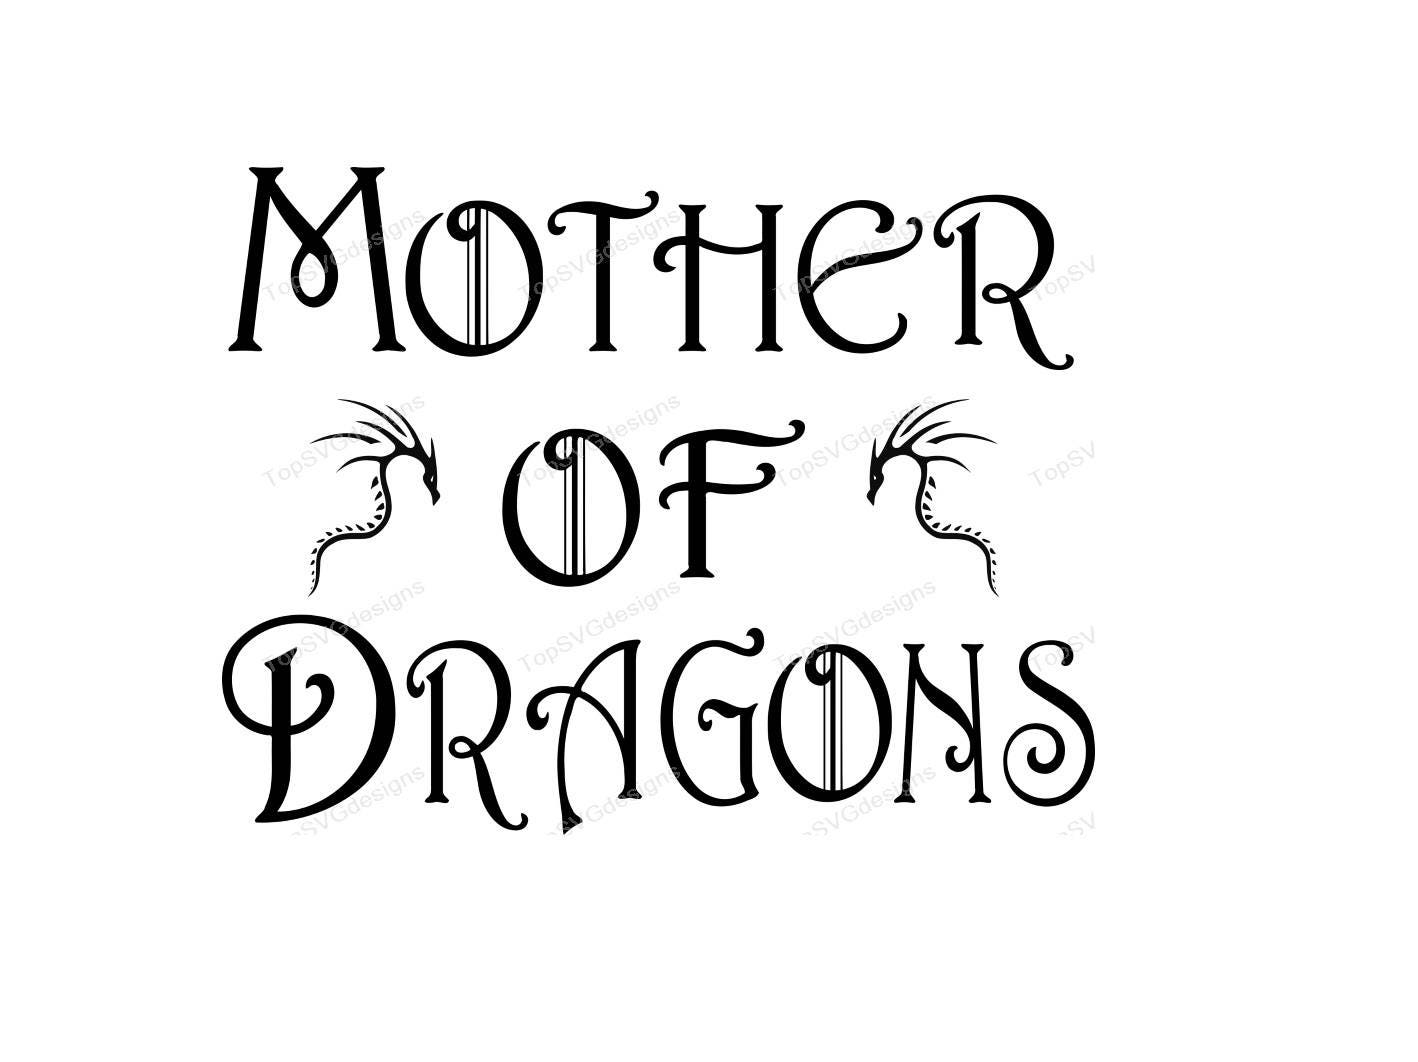 Download Mother of Dragons / game of thrones SVG DXF PNG included ...